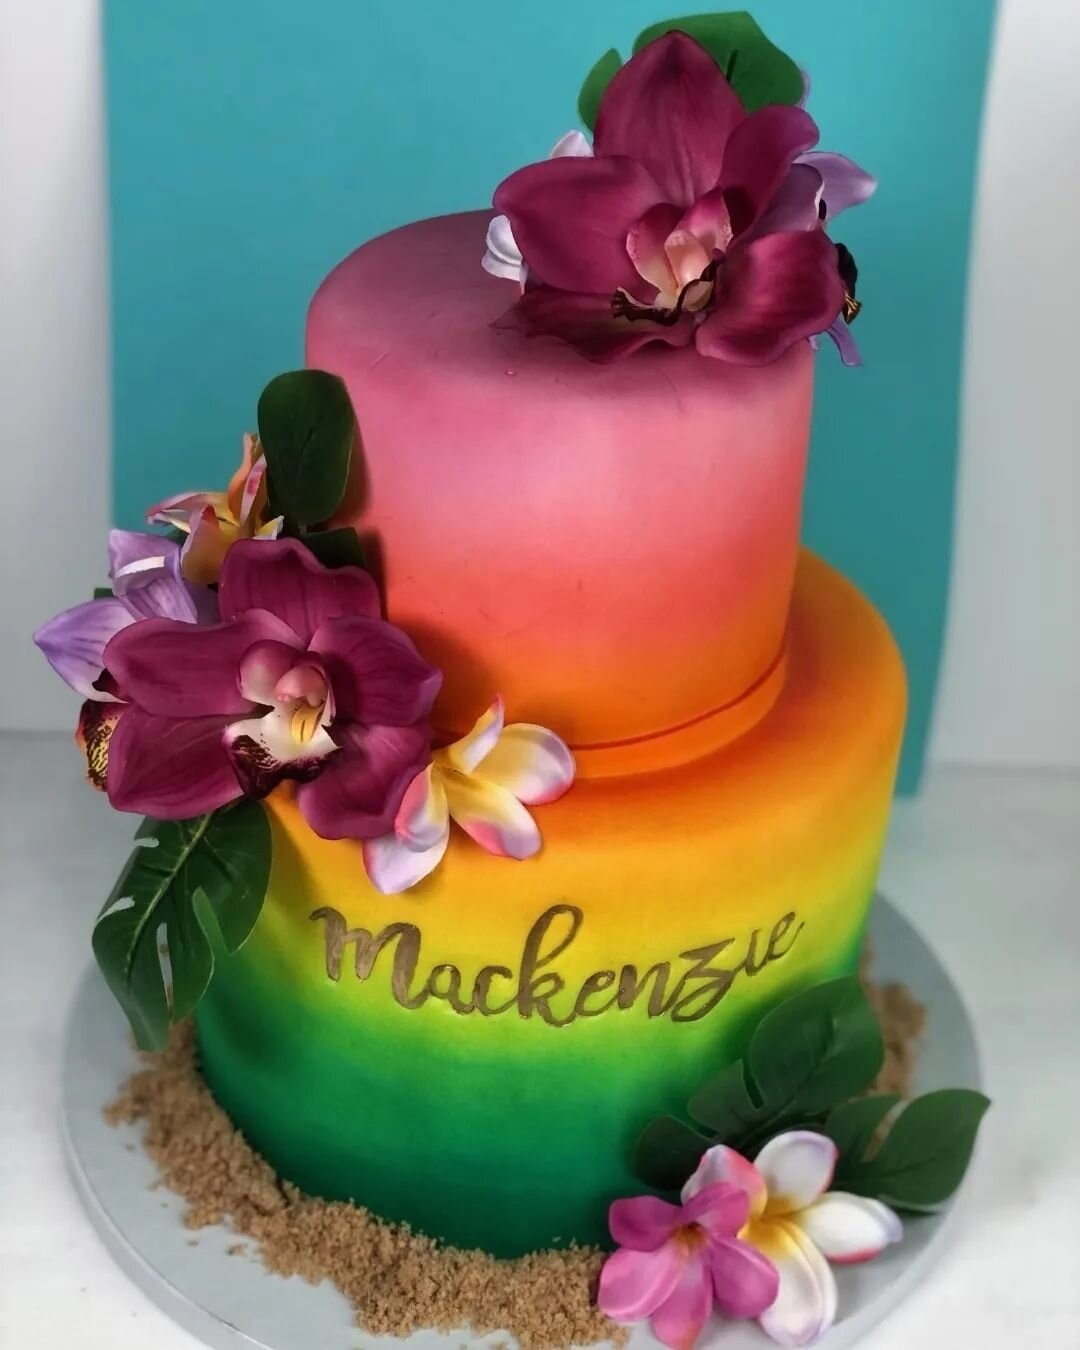 This bright Pina Colada cake  paired with sweet Sugar cookies makes me think of relaxing in a hammock somewhere on a beautiful tropical island with my toes sunk deep beneath the sand.  The pop of color and flower accents blend beautifully together. I